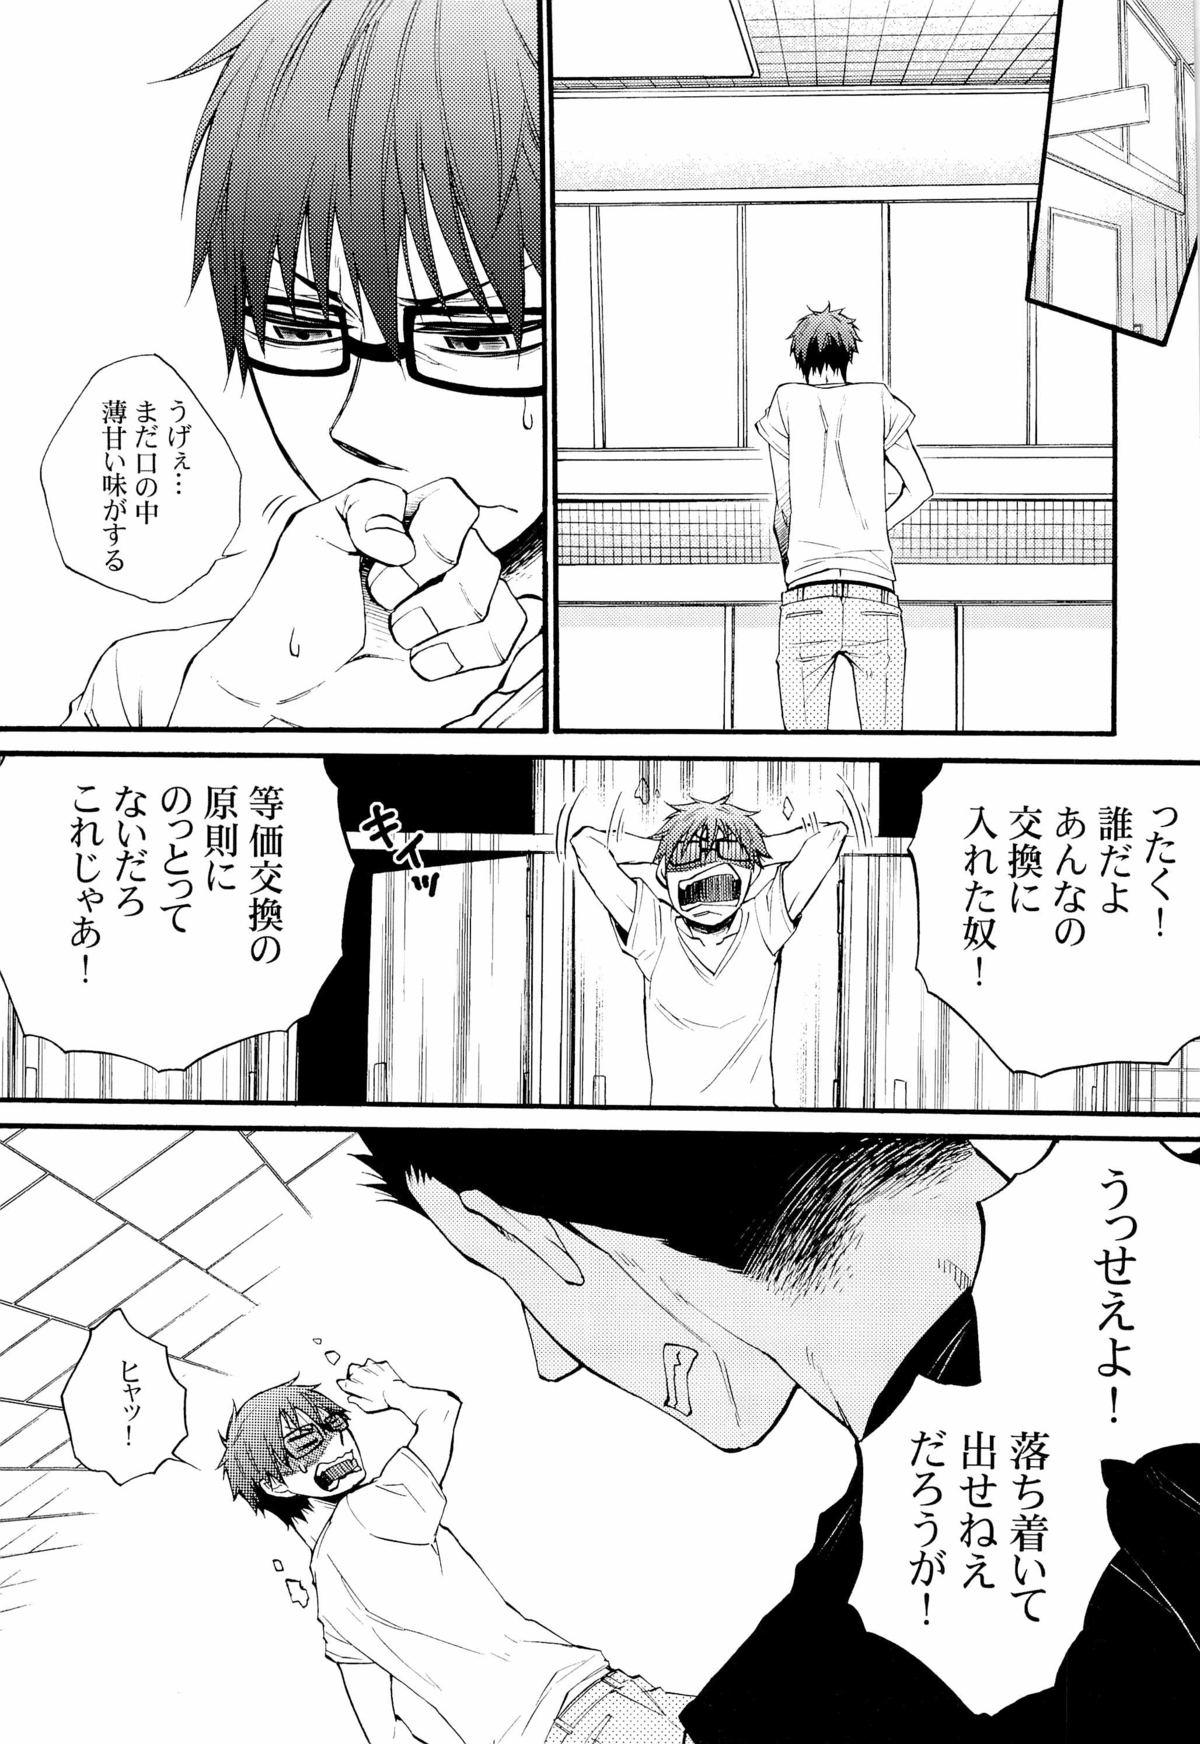 Bus AFTER TASTE - Silver spoon Virtual - Page 7